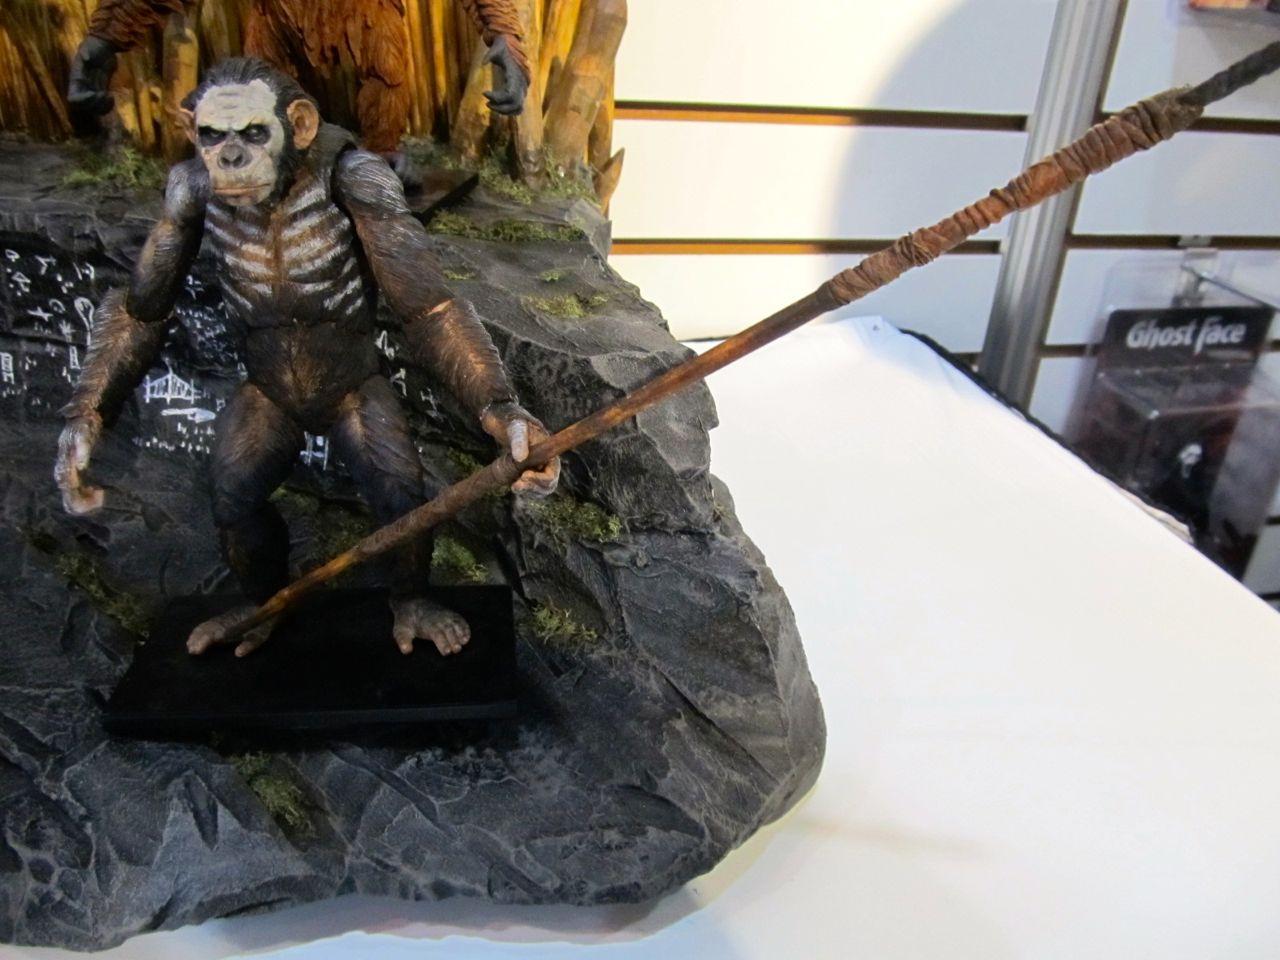 Hr_neca_dawn_of_the_planet_of_the_apes_2